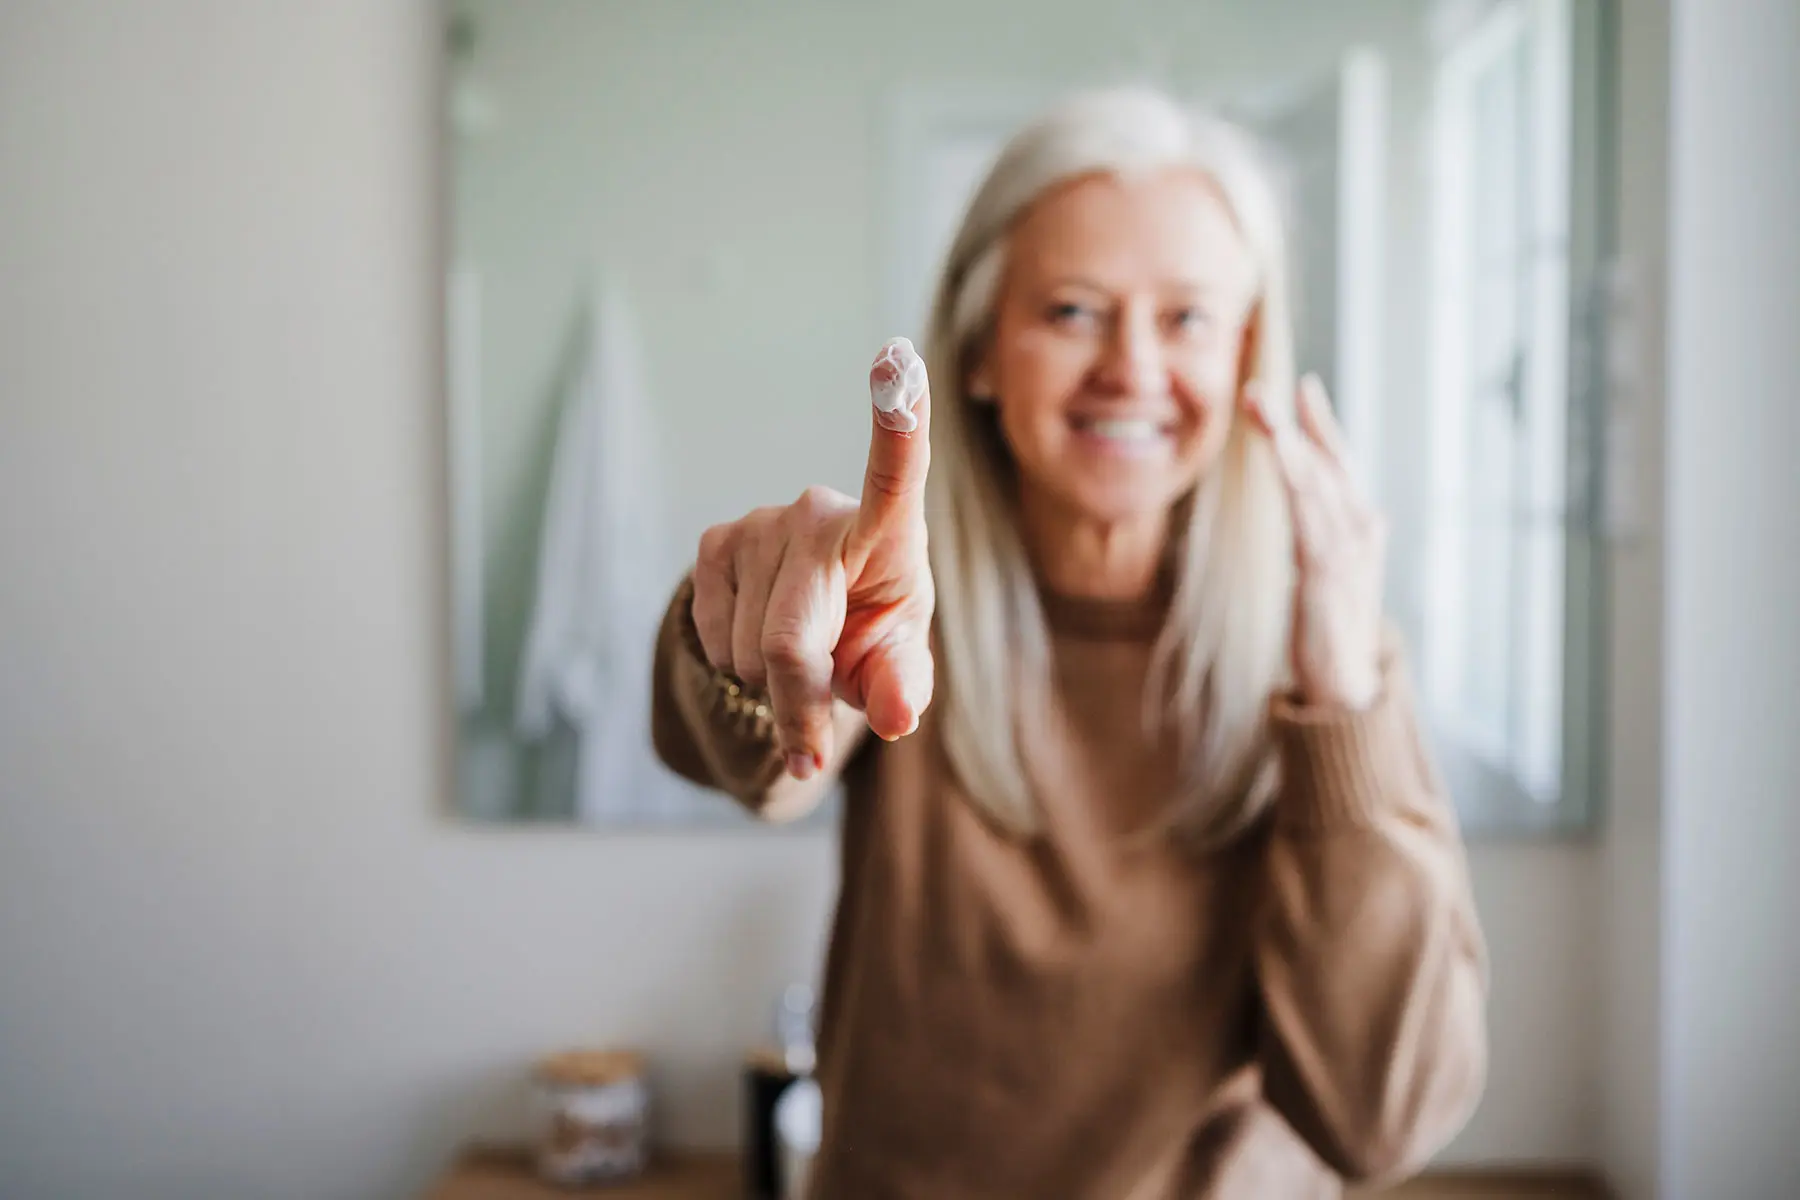 Woman with shoulder length white hair in bathroom smiling with face out of focus, hand in focus with moisturizer on finger. AW552